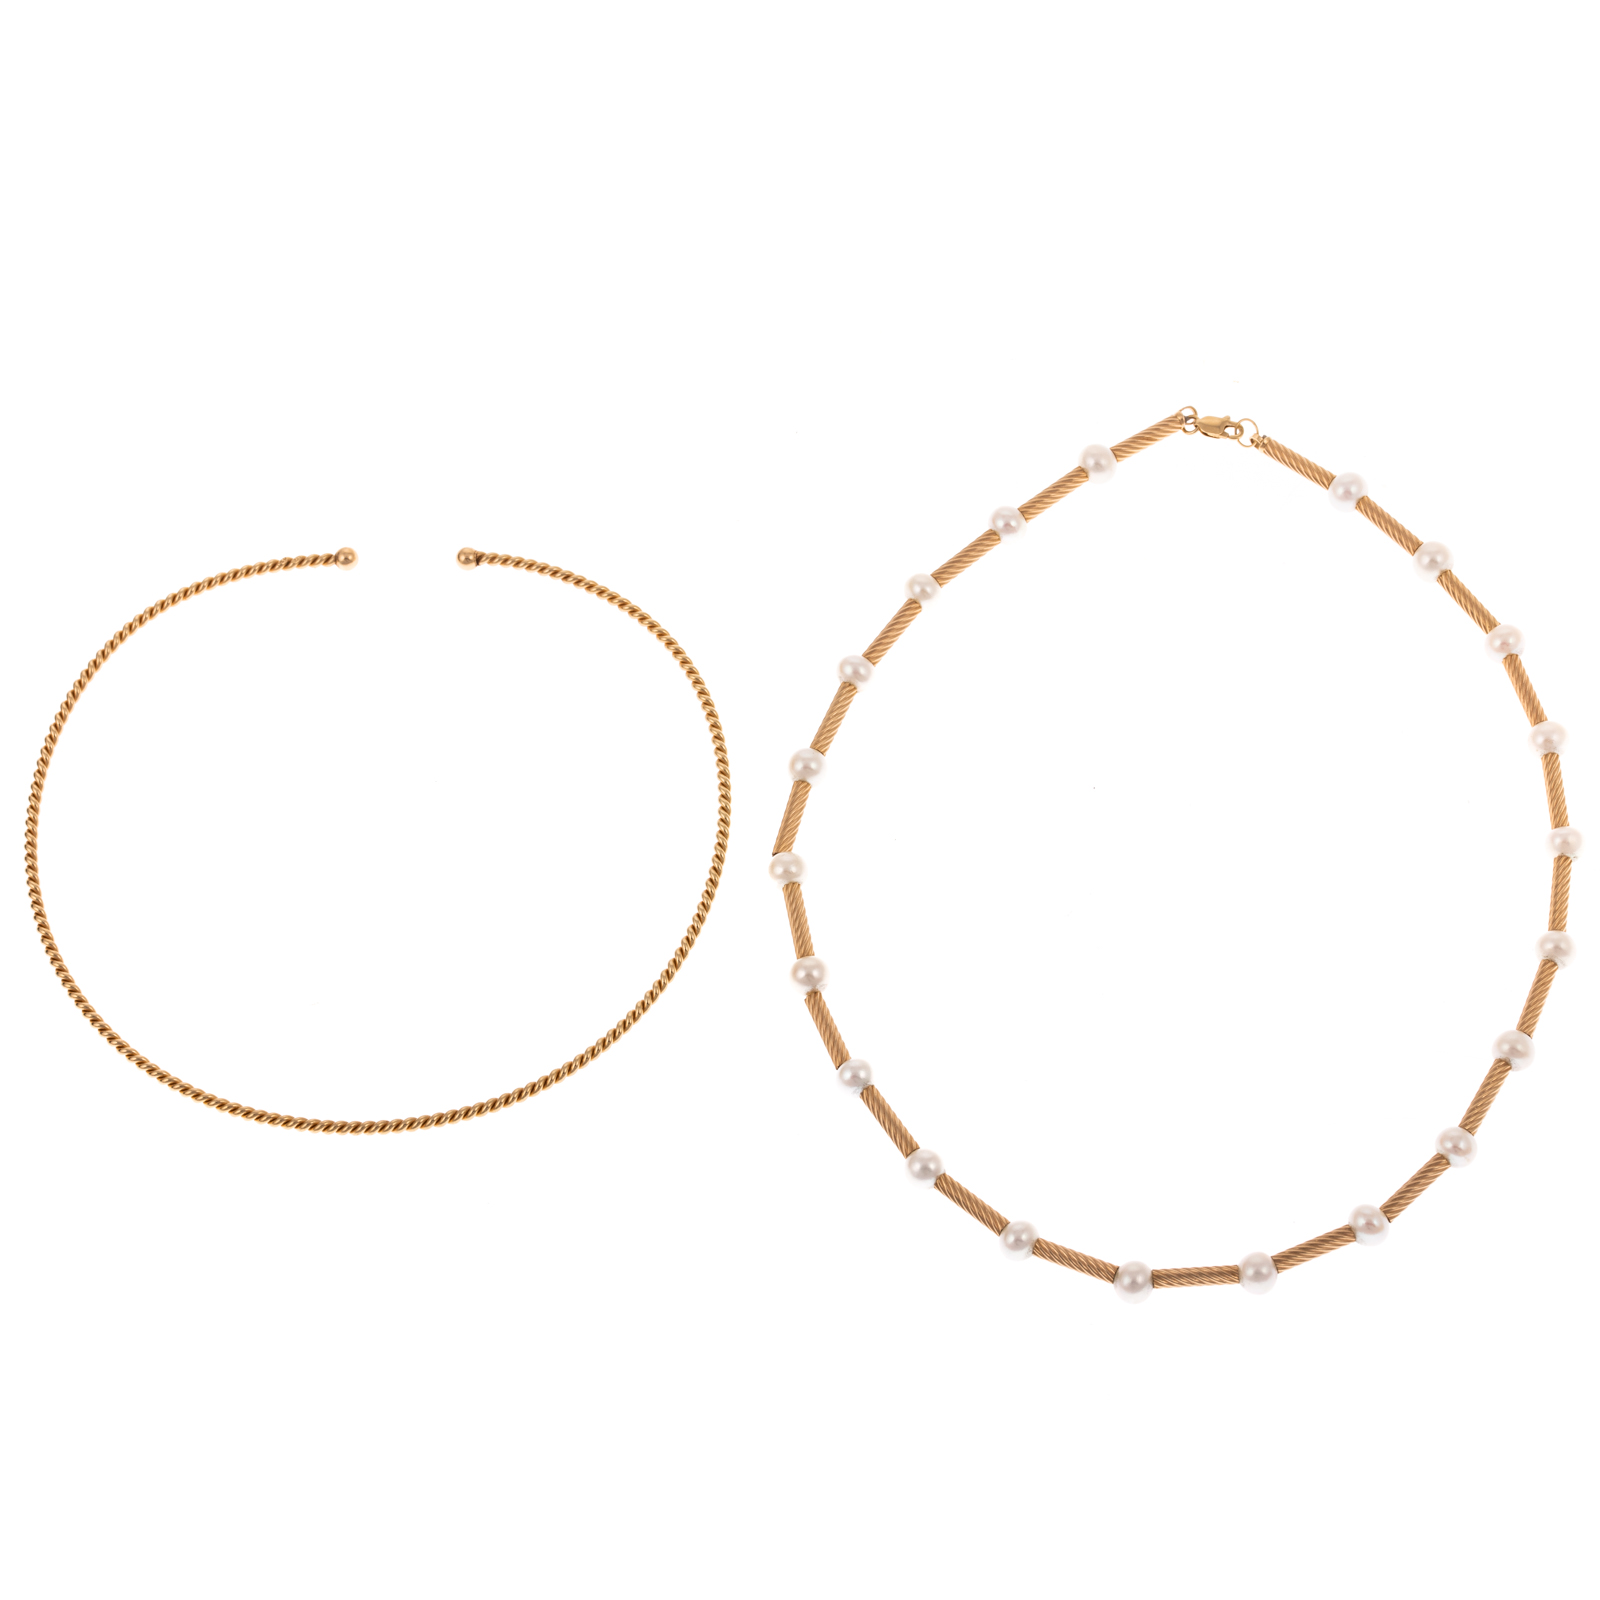 TWO 14K YELLOW GOLD TWIST NECKLACES 287b24